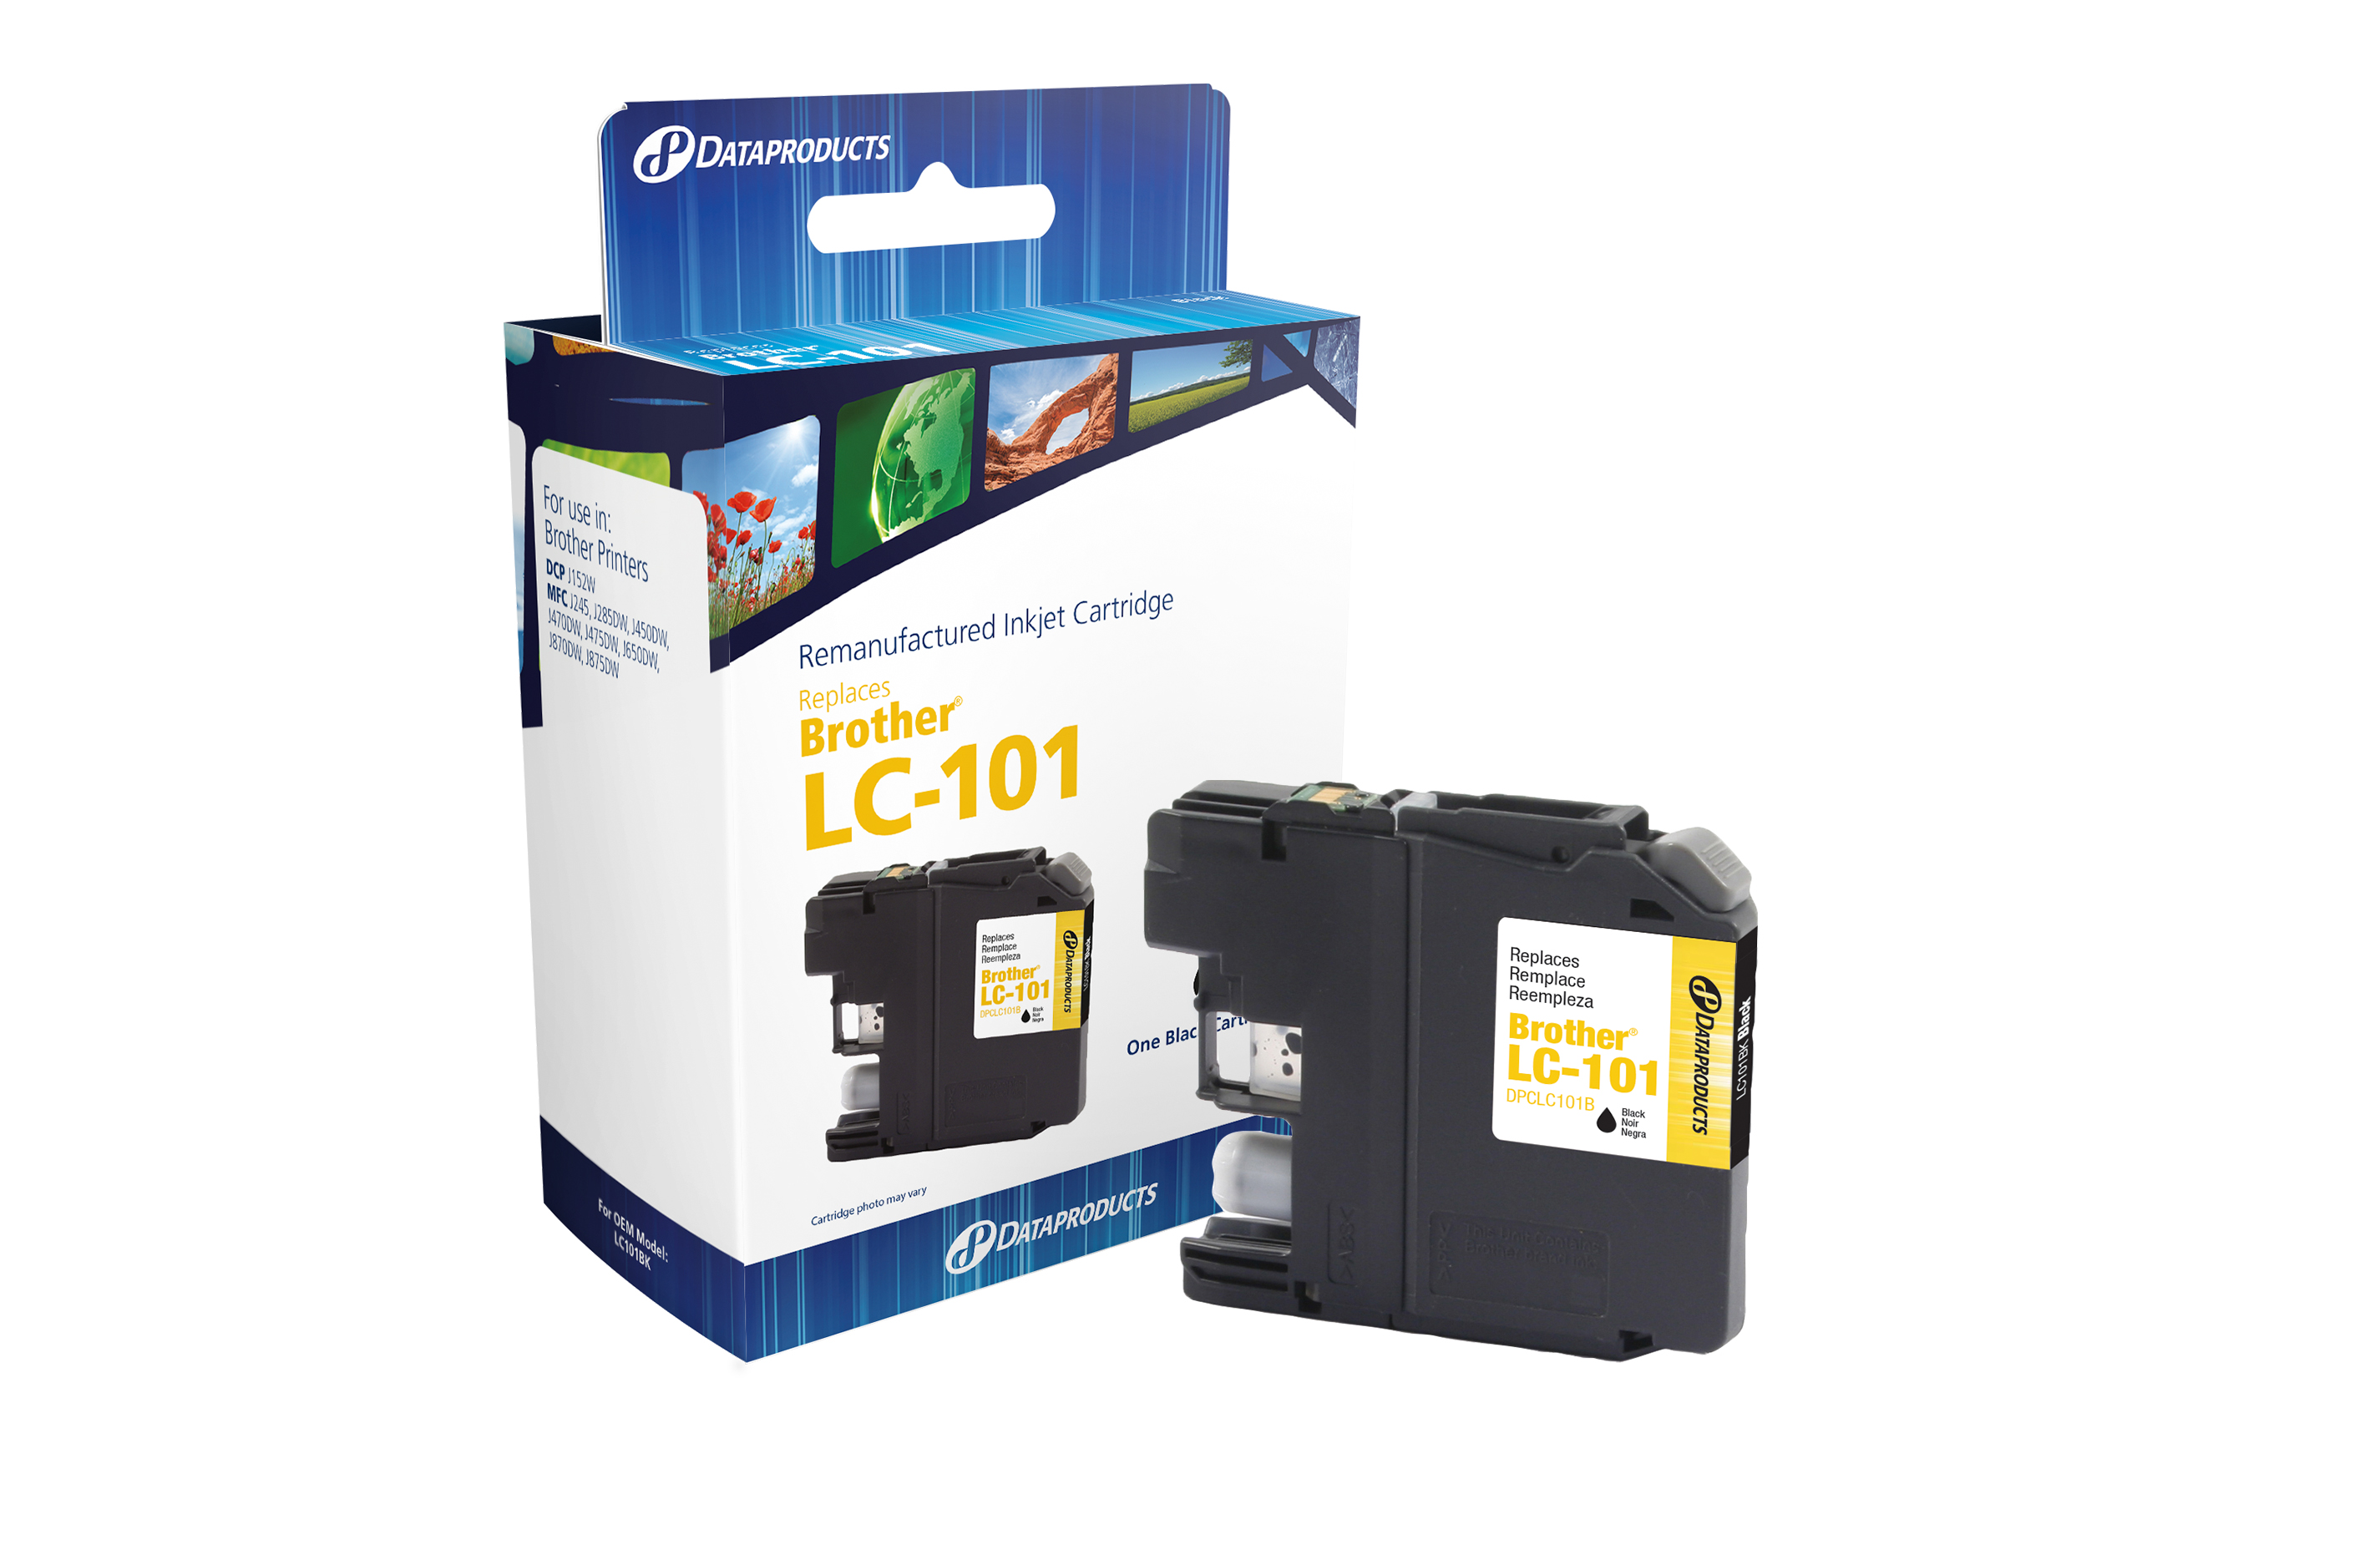 Dataproducts DPCLC101B Remanufactured Brother LC101 Black Ink